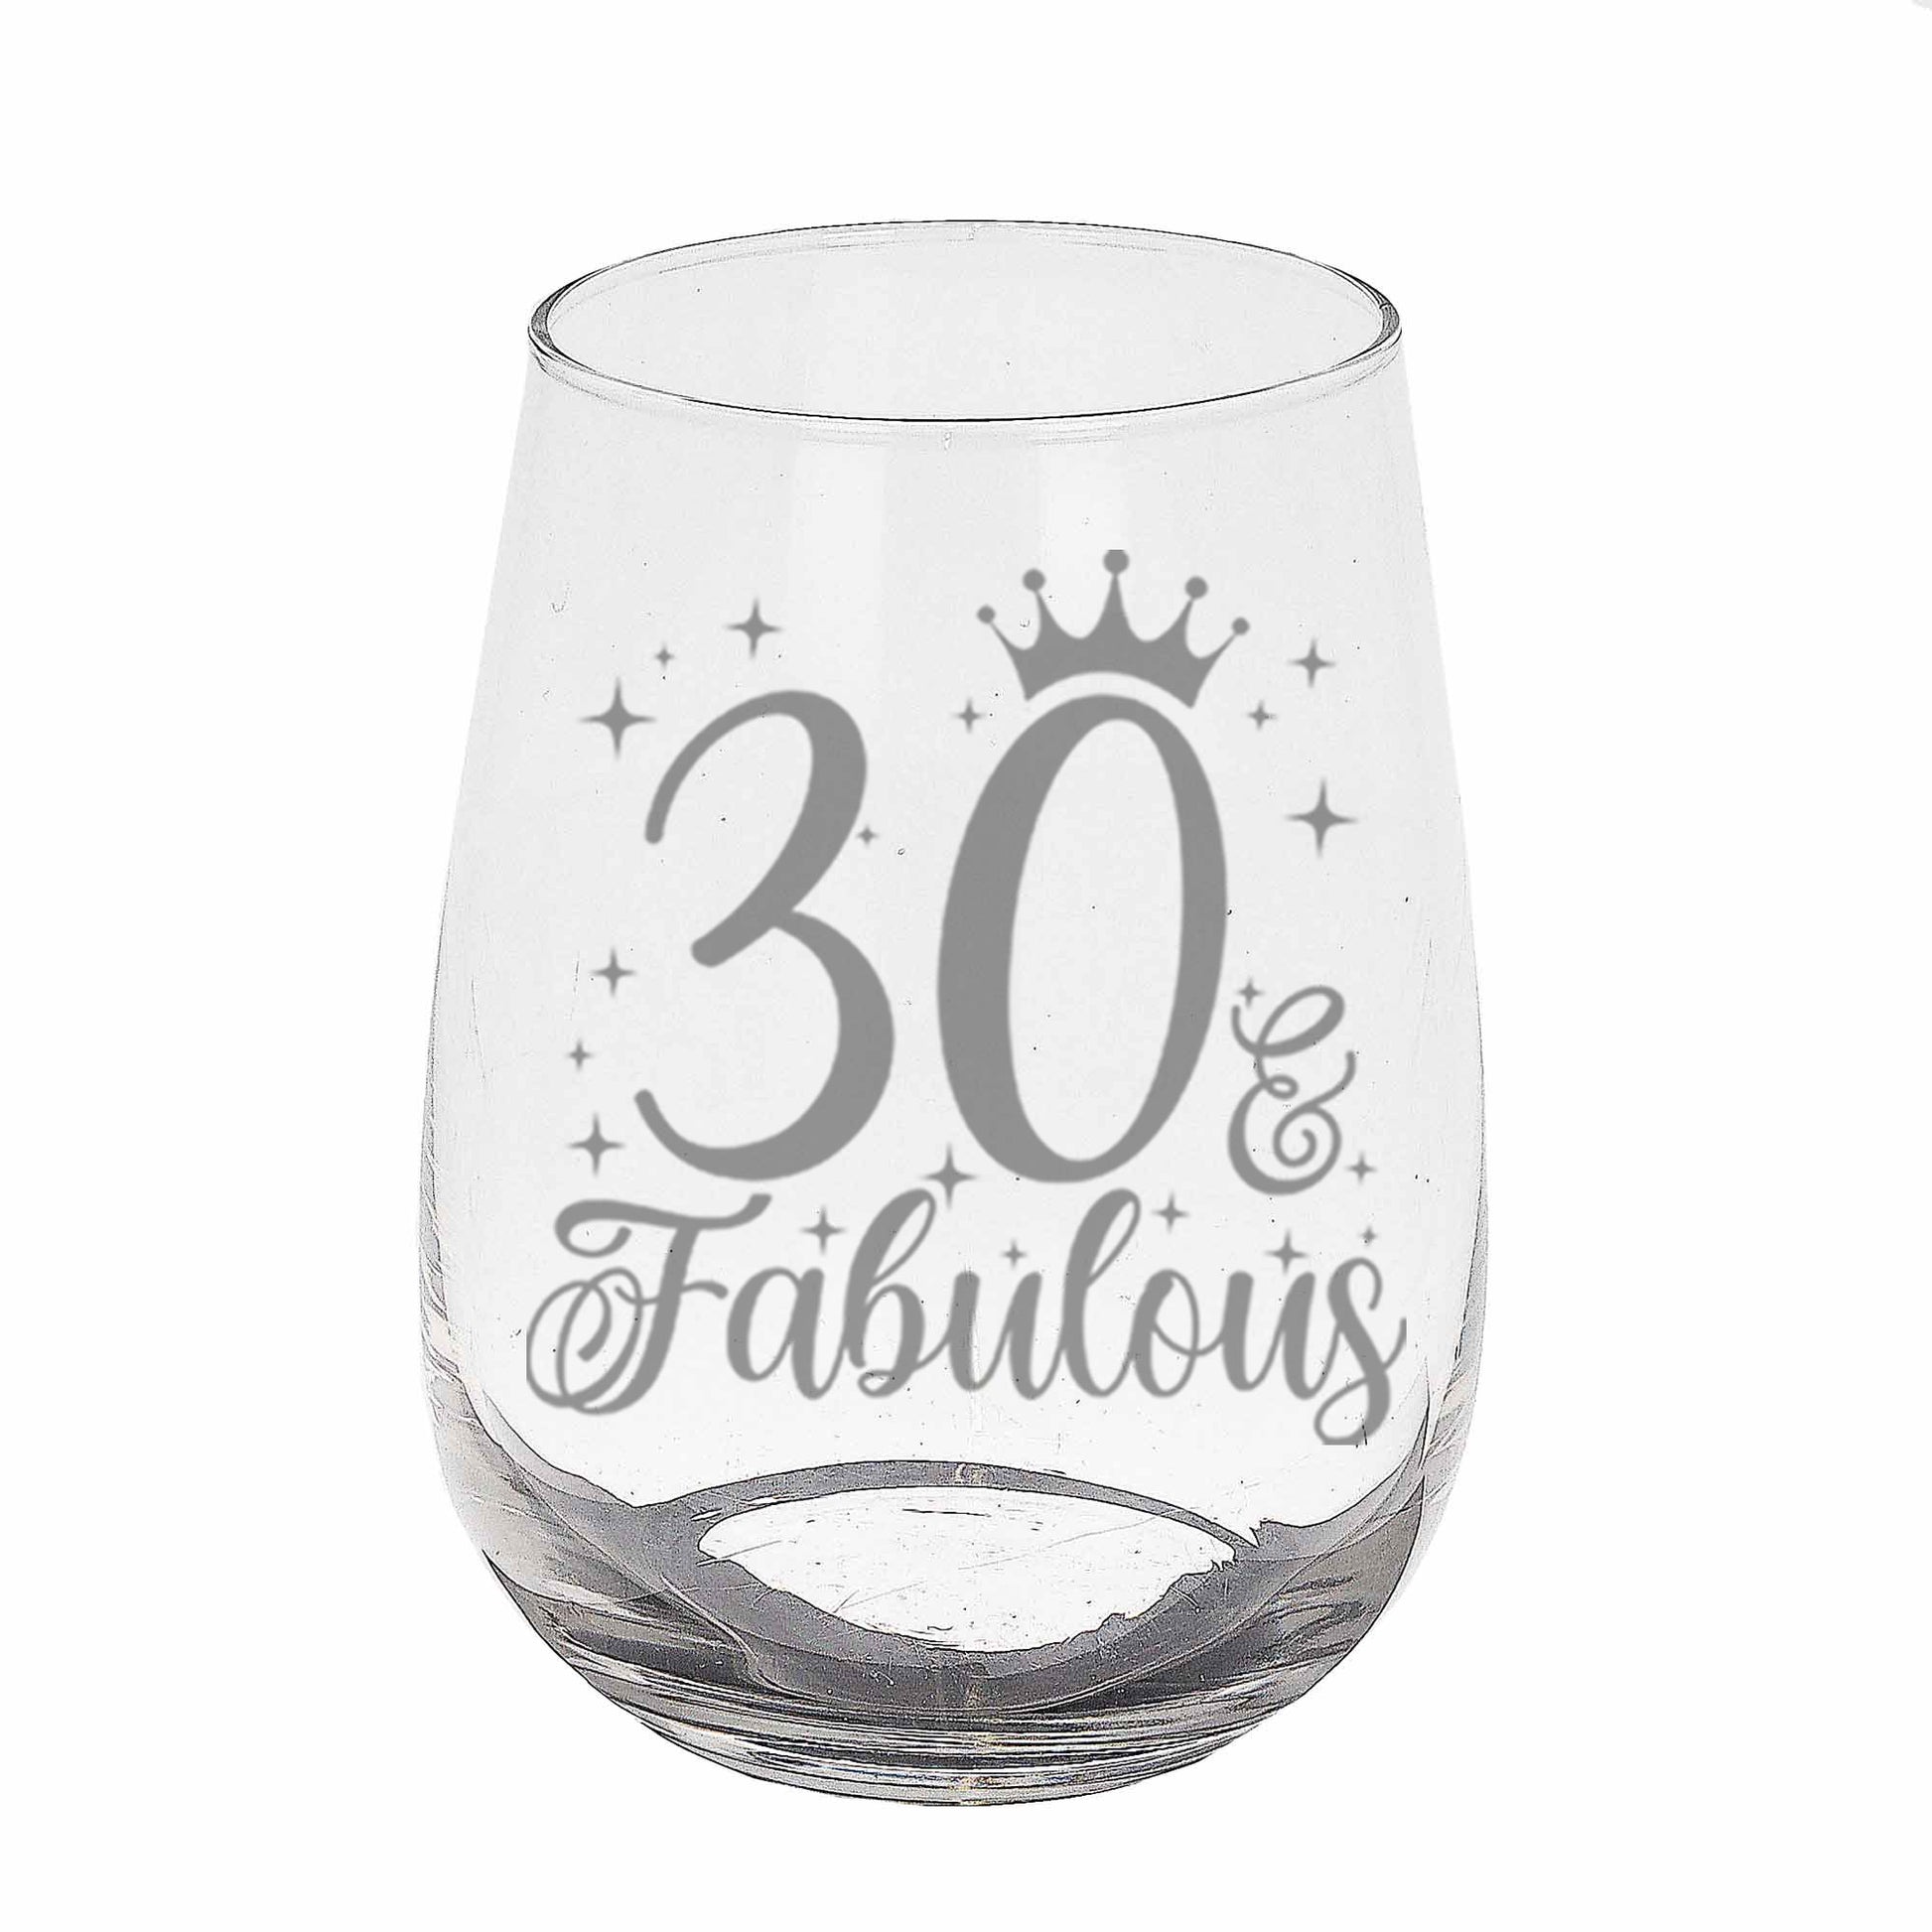 30 & Fabulous Engraved Stemless Gin Glass and/or Coaster Set  - Always Looking Good - Stemless Gin Glass On Its Own  